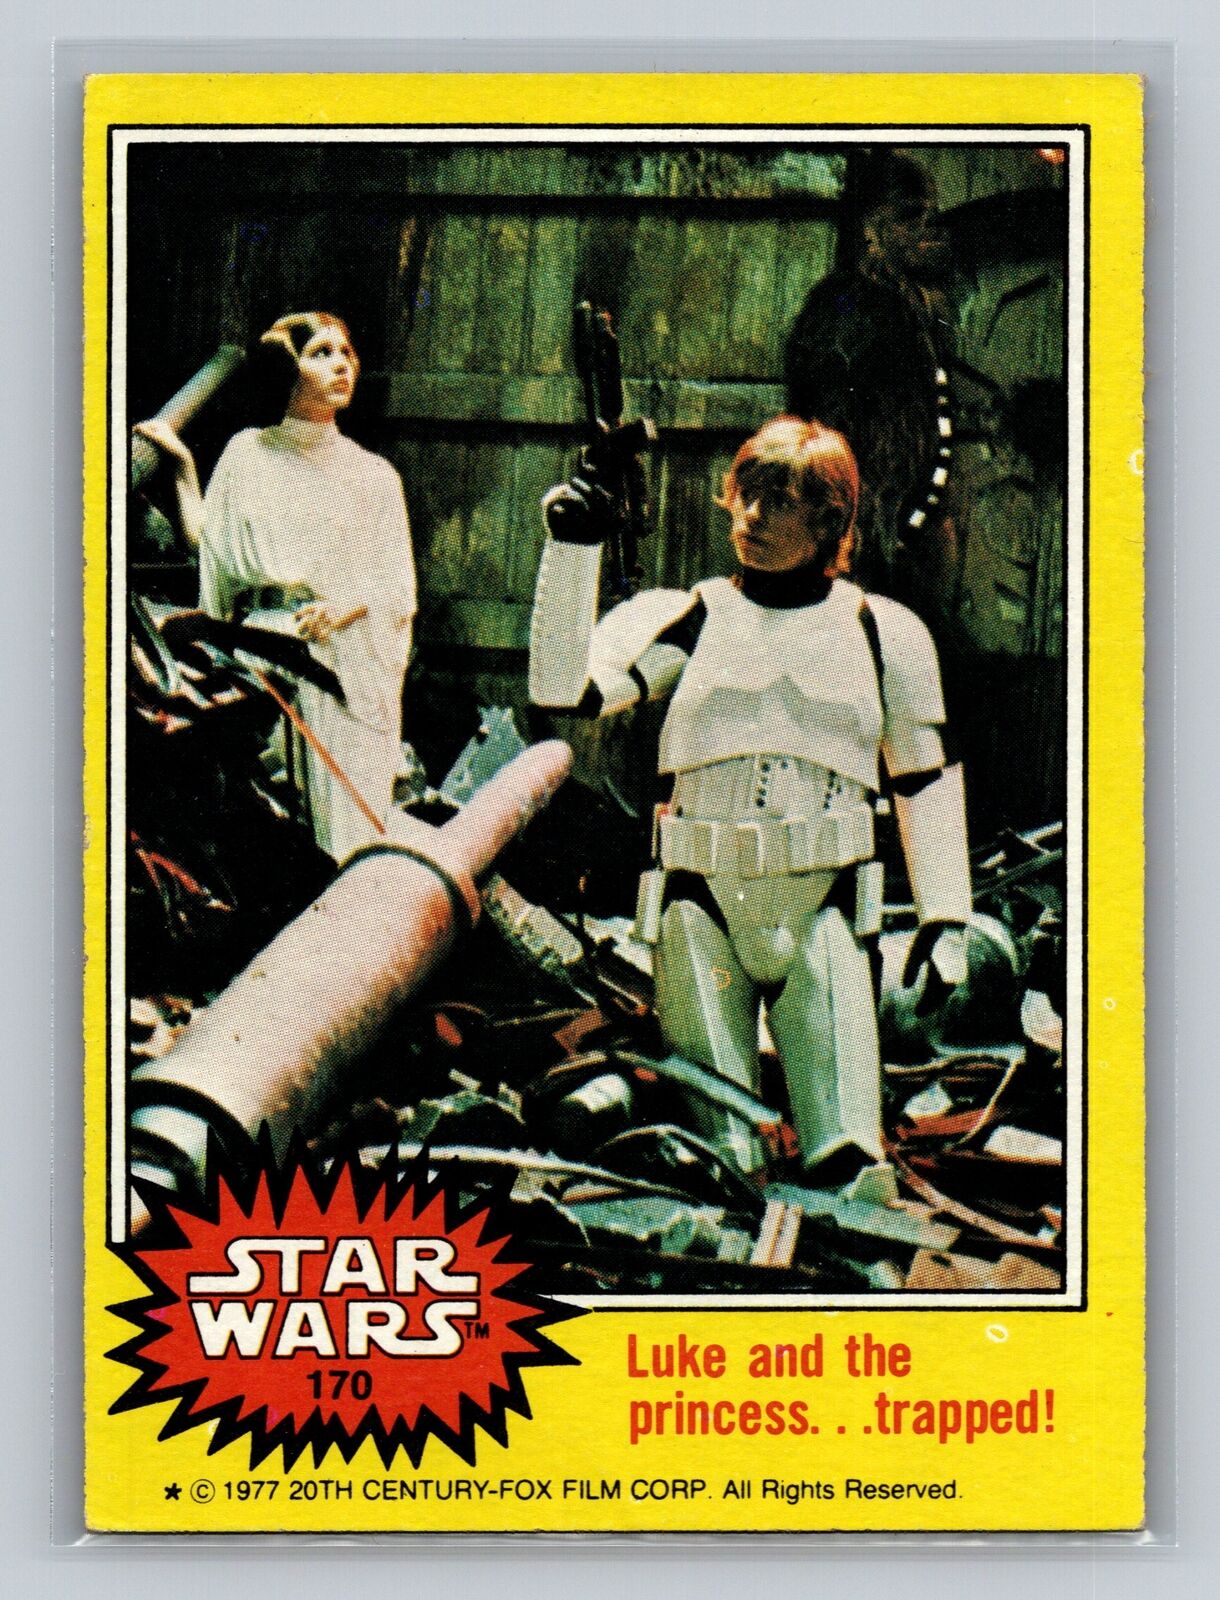 Luke and the princess...trapped 1977 Topps Star Wars #170